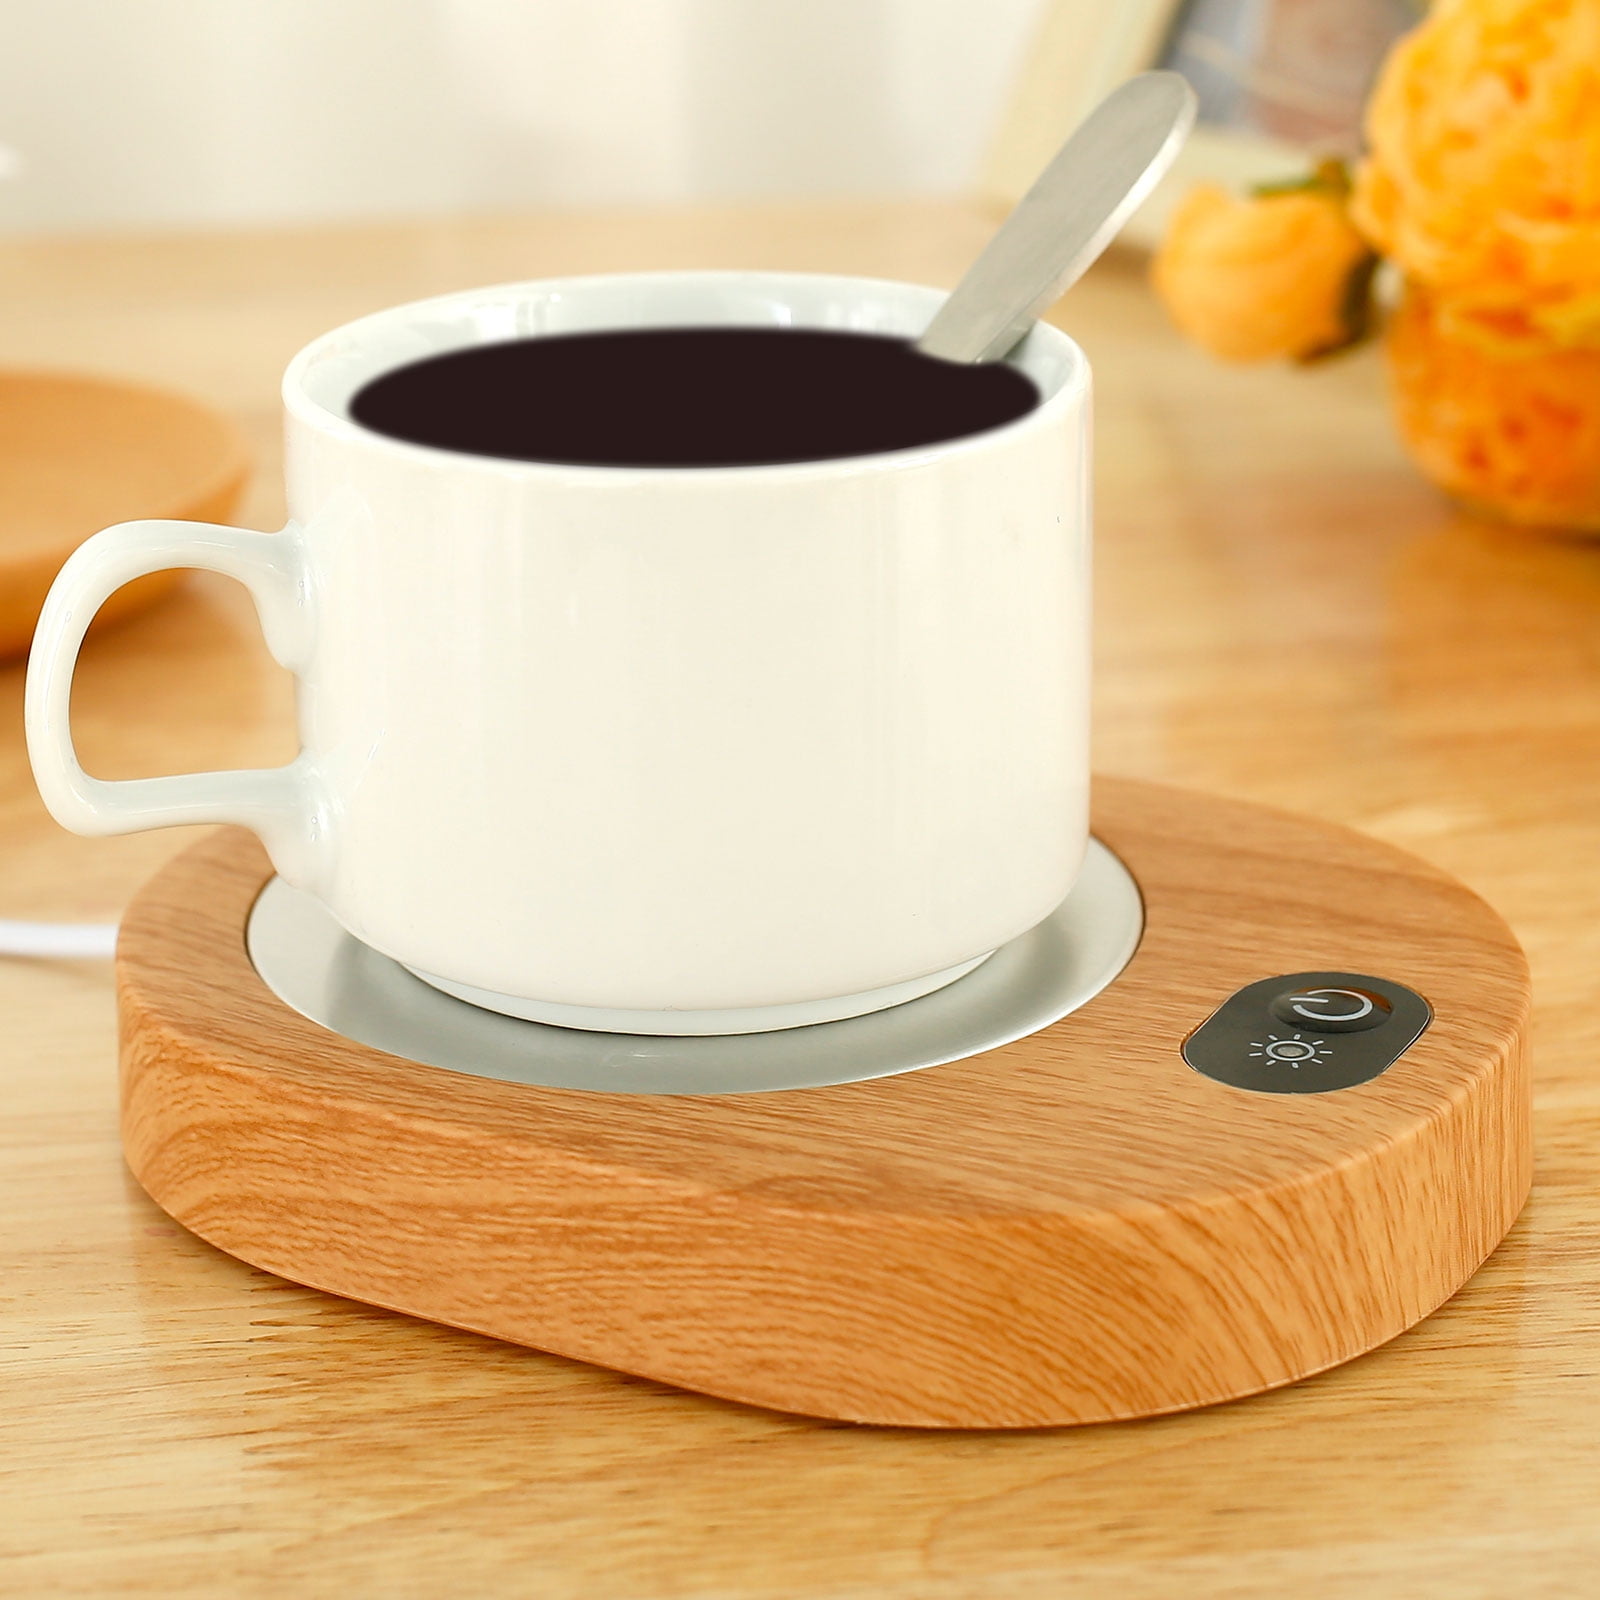 Smart Portable Cup Warmer For Office & Home - Inspire Uplift